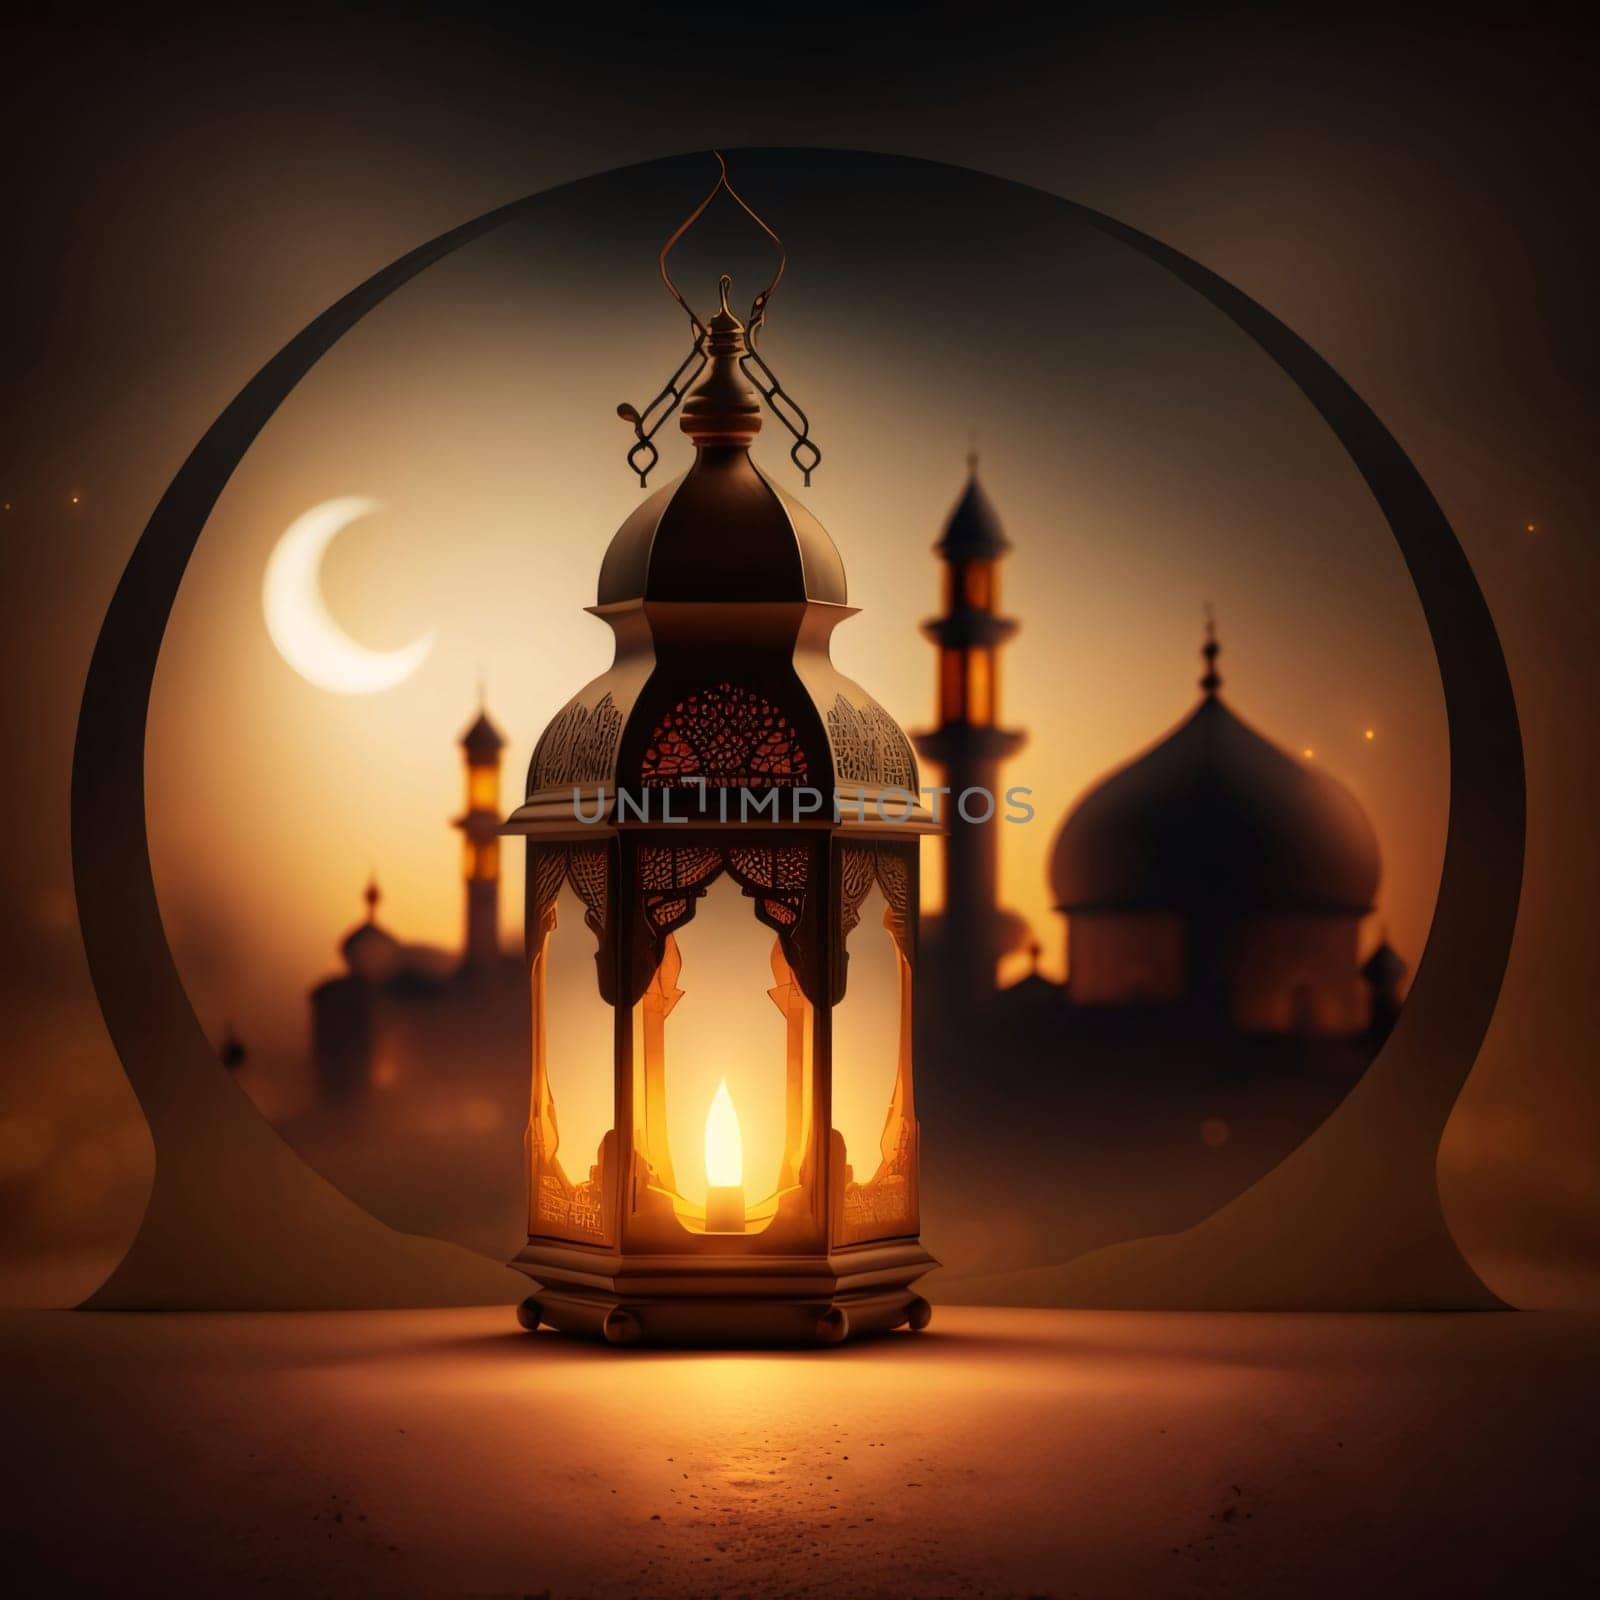 Burning lantern in the background of the mosque building and the Crescent Moon in the sky. Lantern as a symbol of Ramadan for Muslims. A time to meet with God.